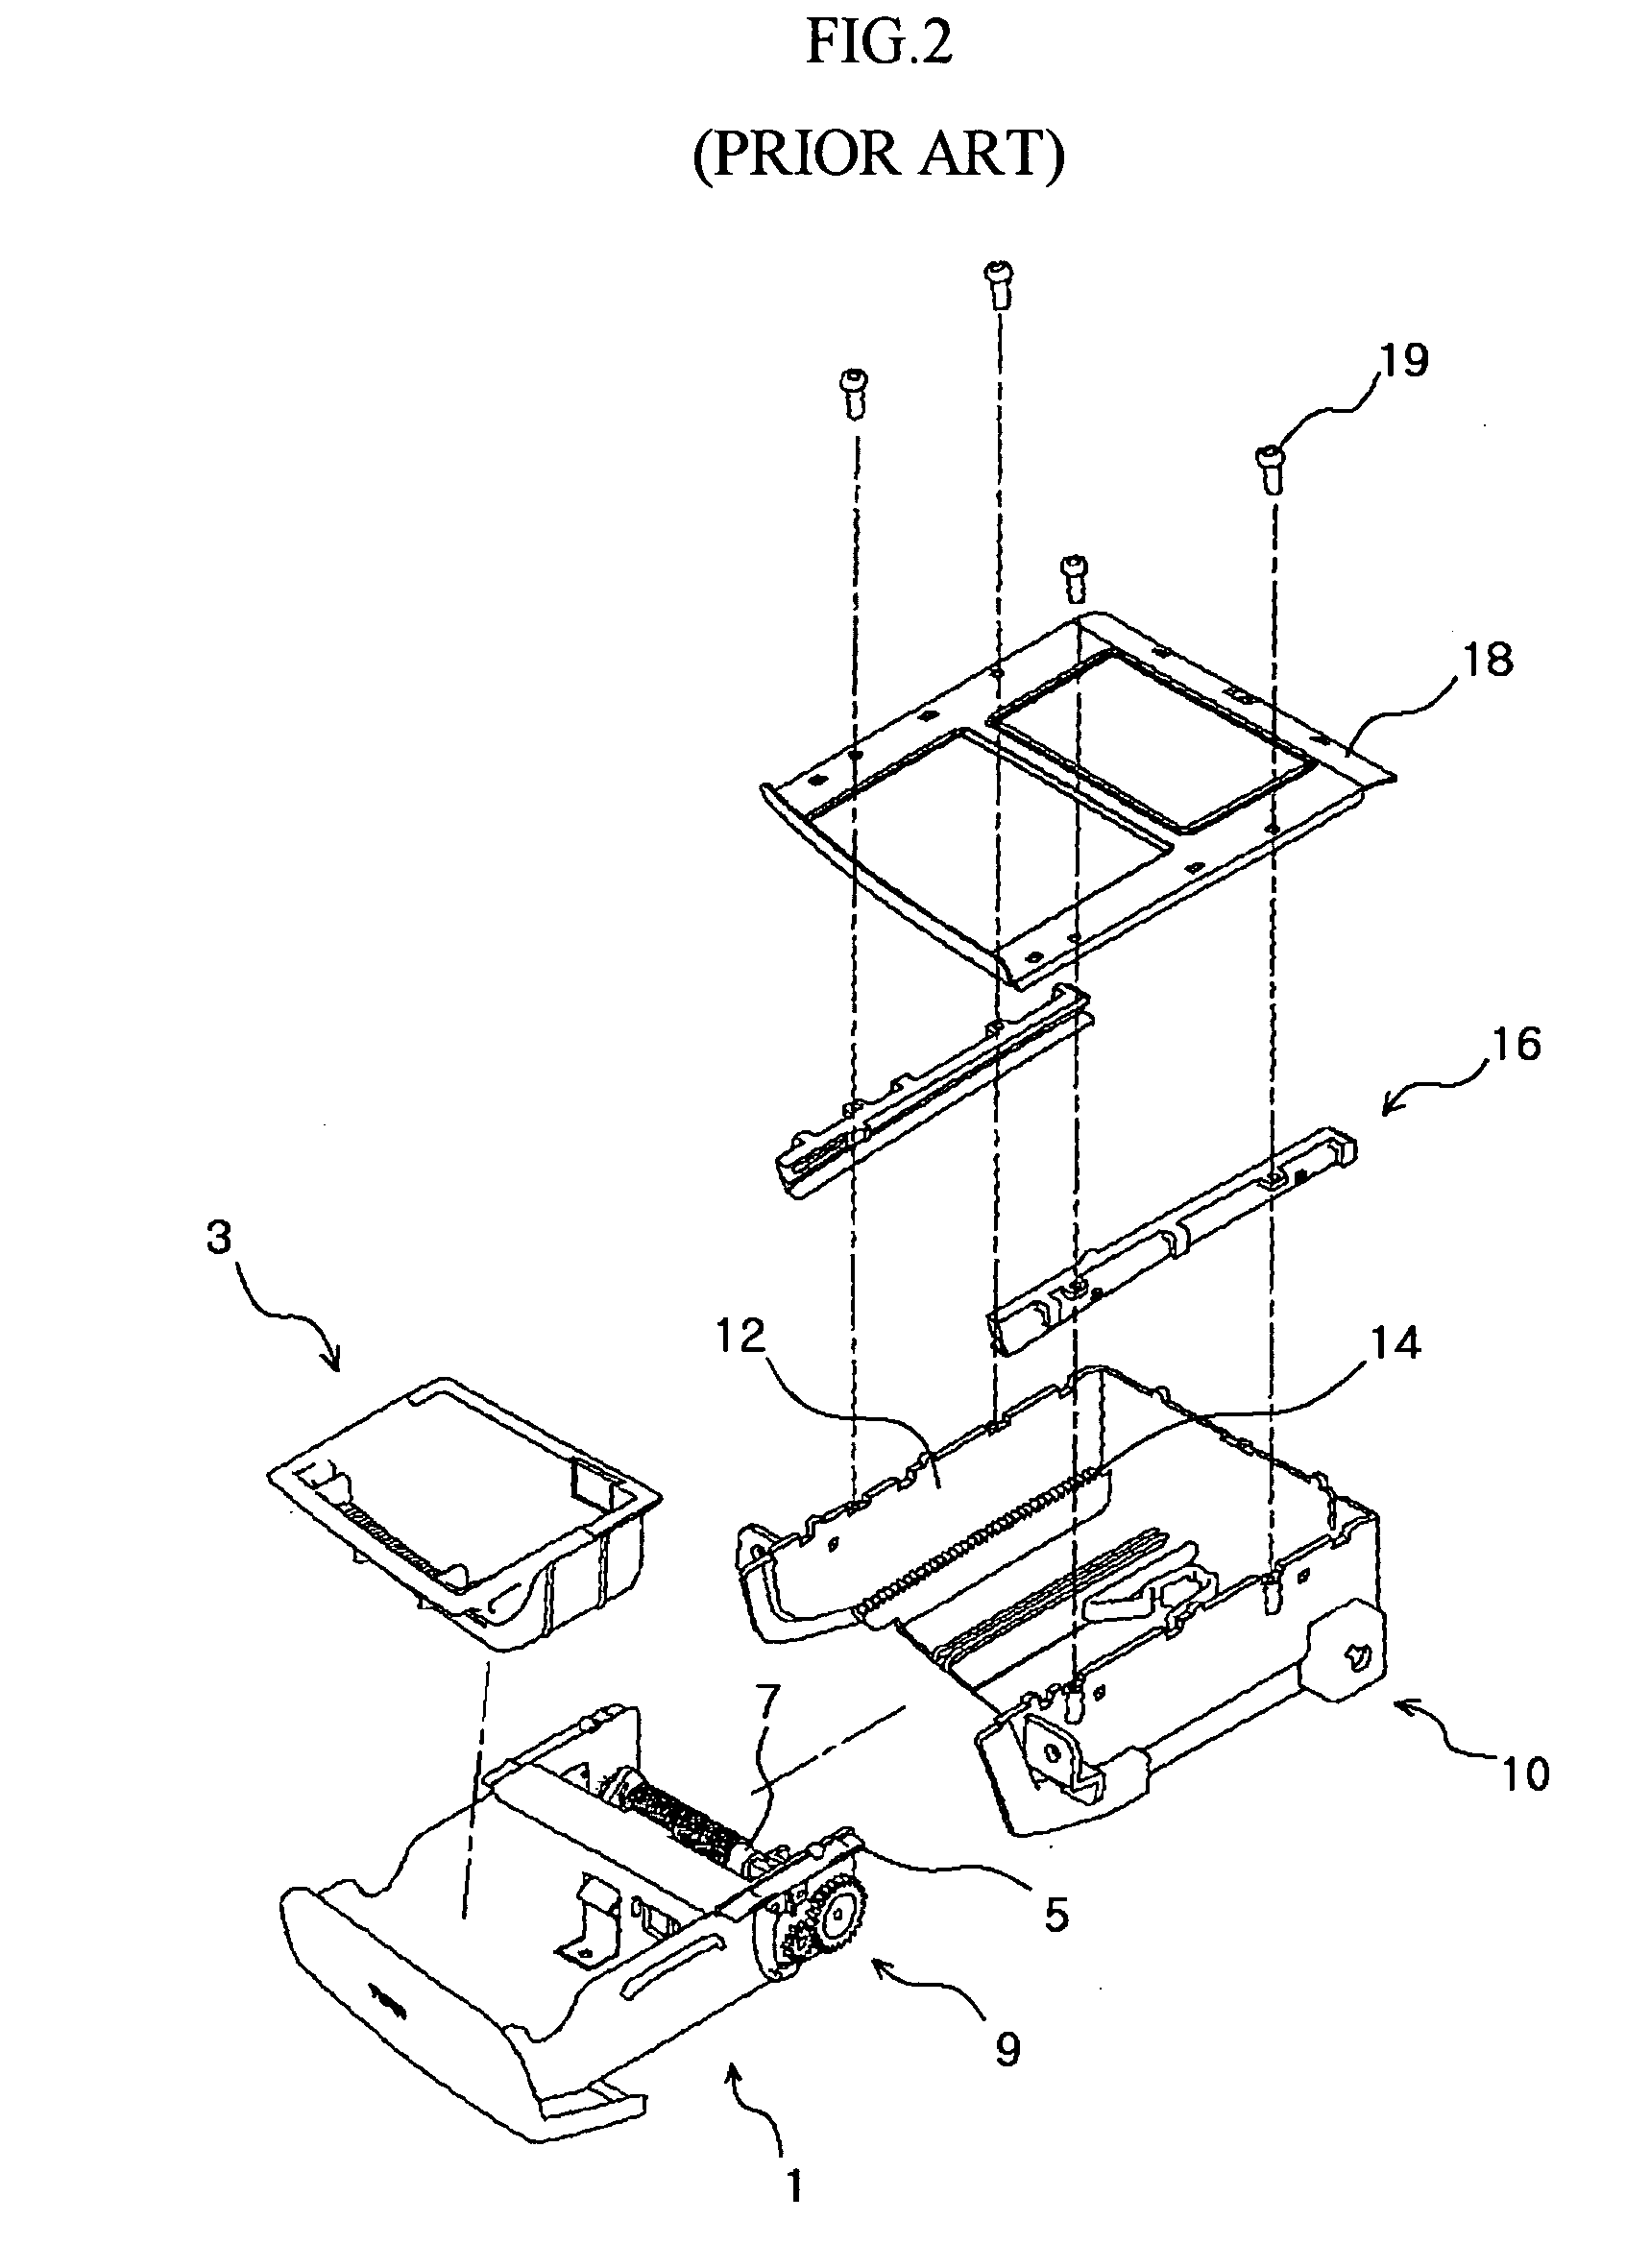 Guide structure for vehicular tray